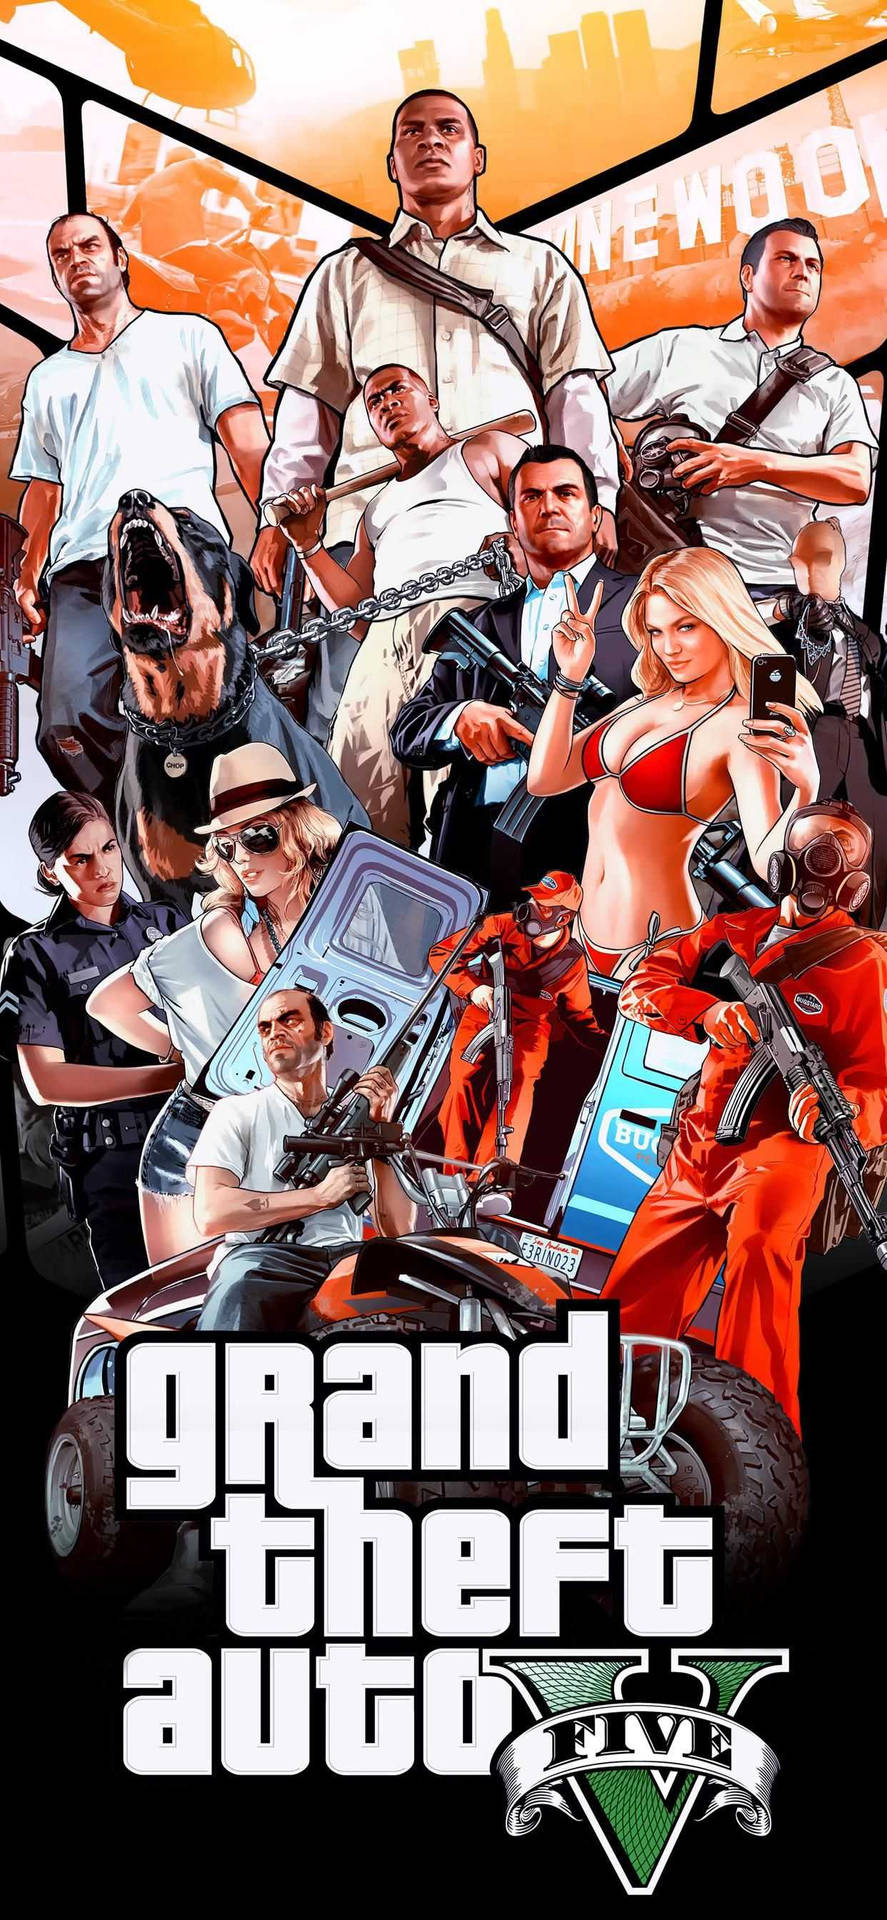 Gta 5 Poster Collage